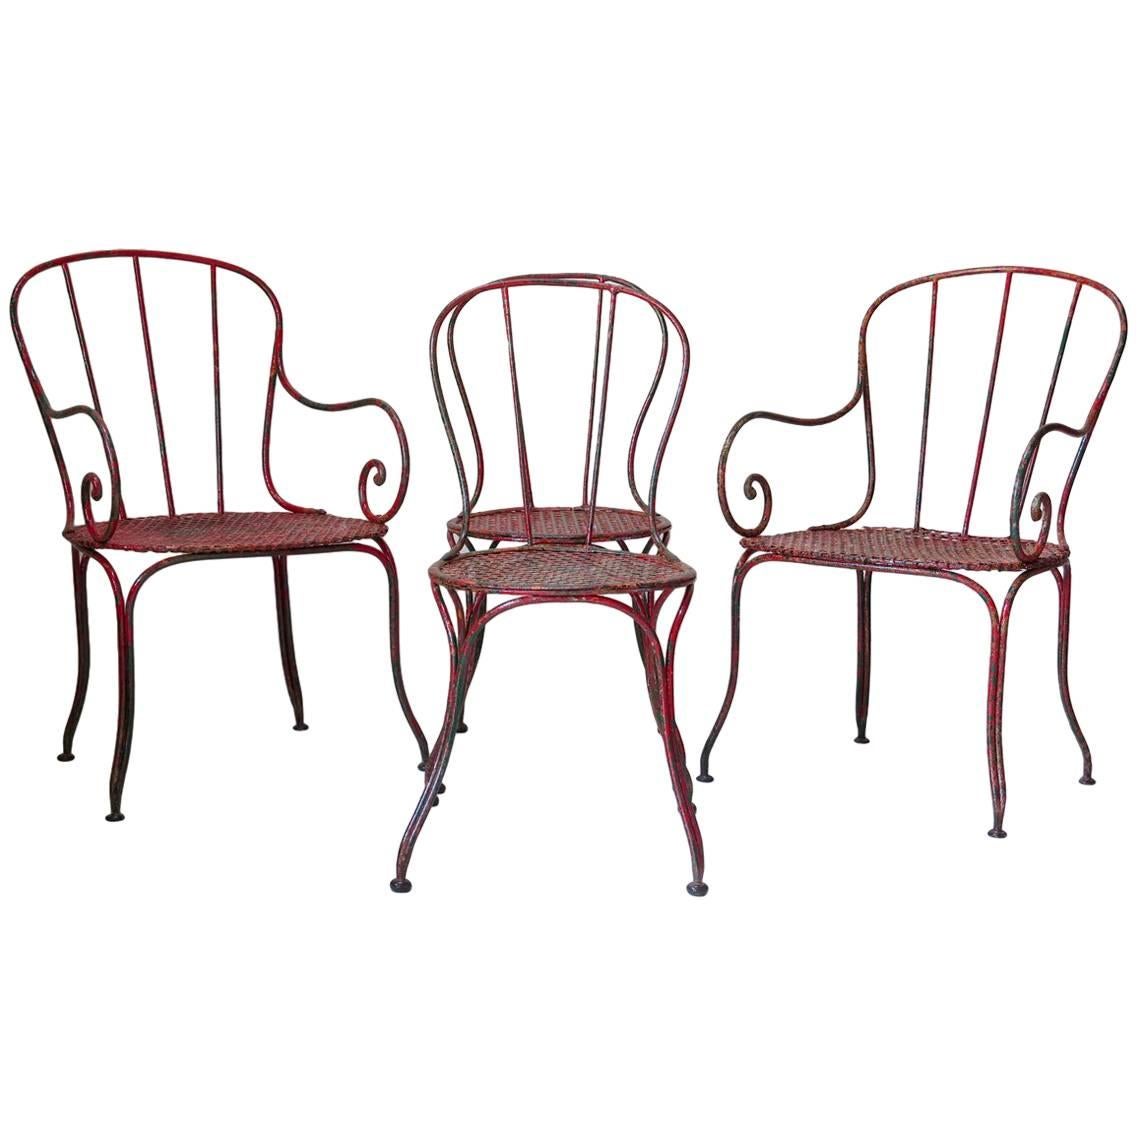 French circa 1900 Wrought Iron Chair and Armchair Set